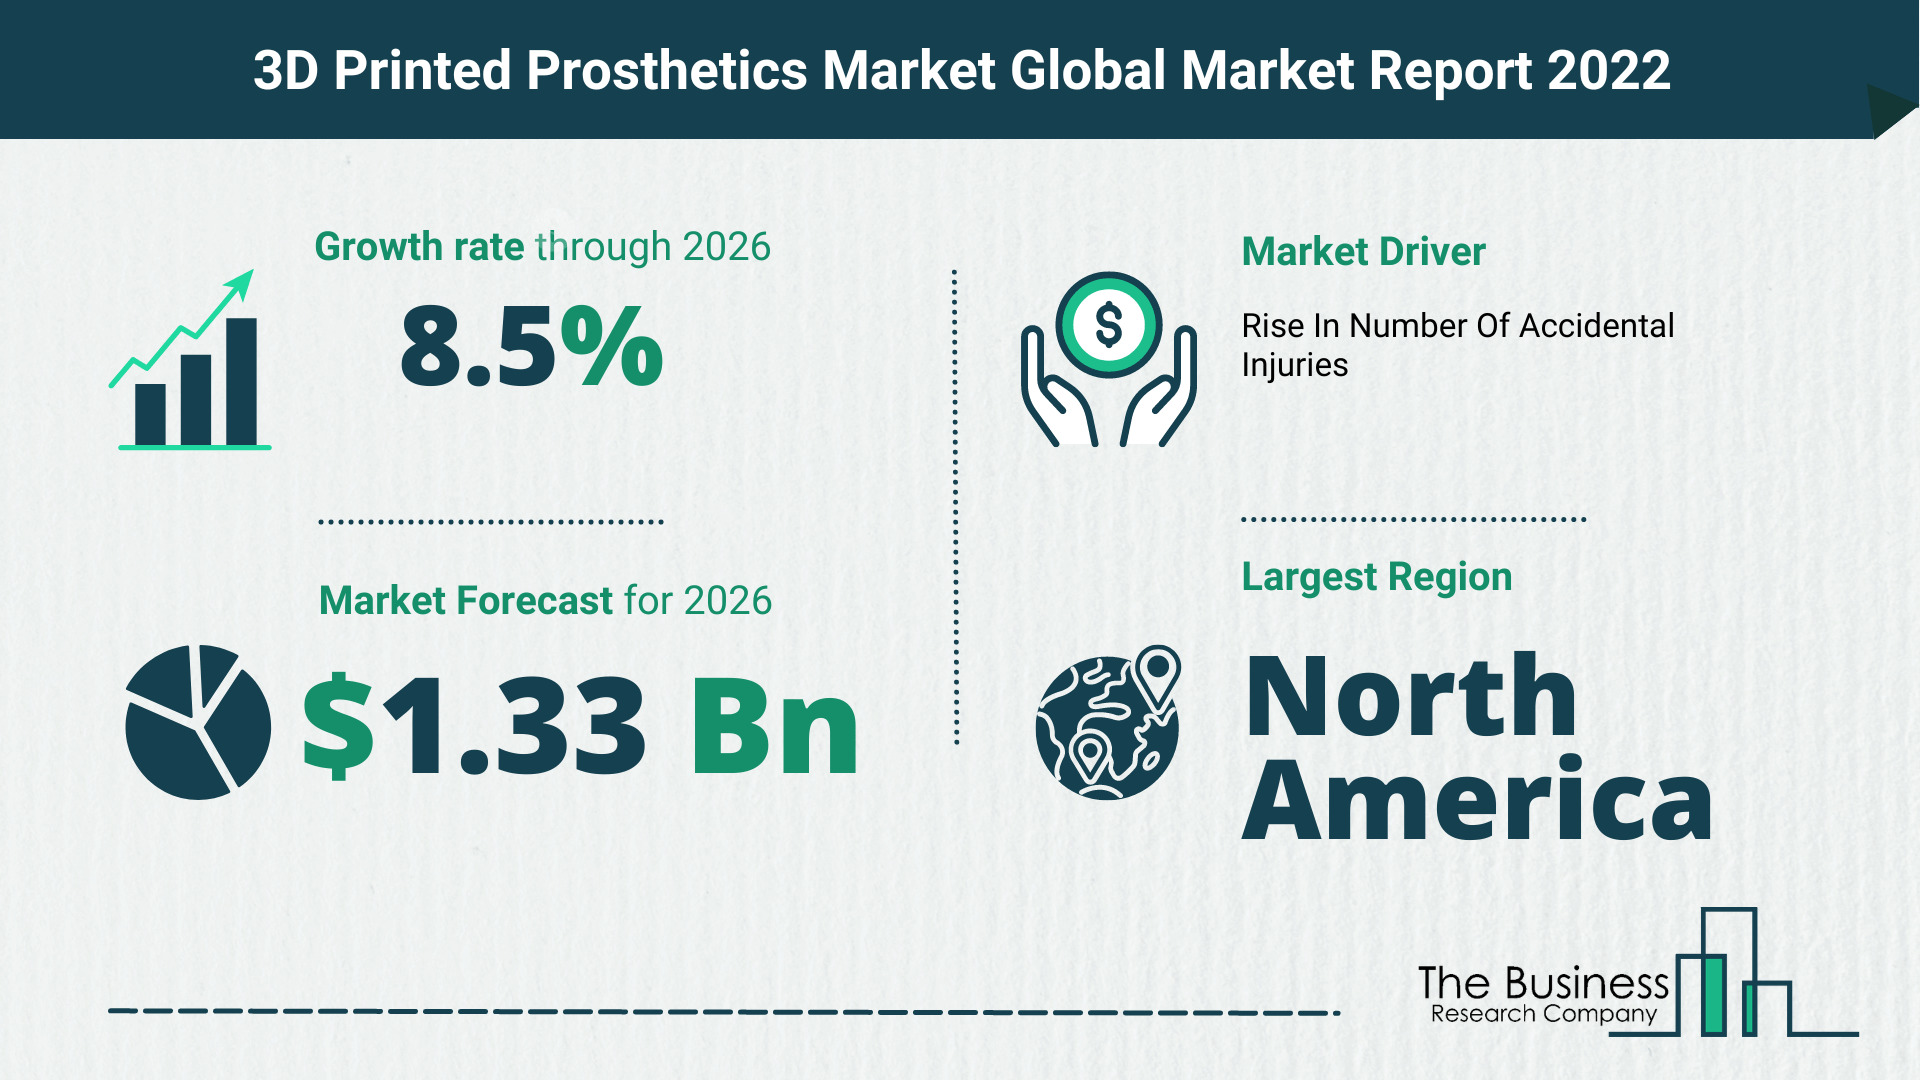 The 3D Printed Prosthetics Market Share, Market Size, And Growth Rate 2022